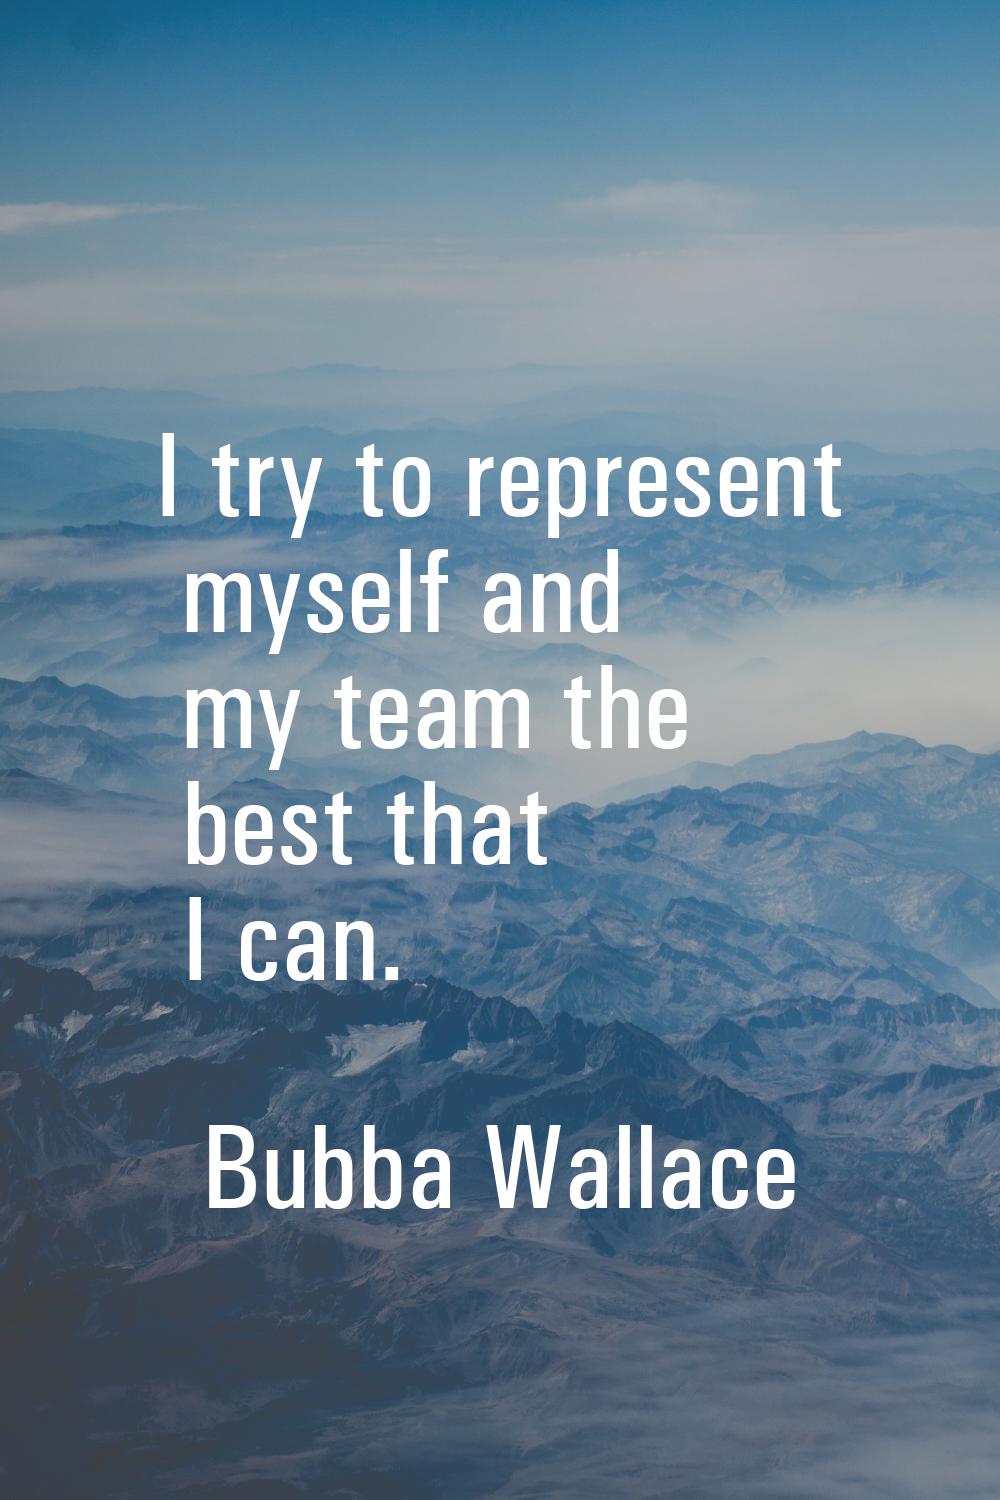 I try to represent myself and my team the best that I can.